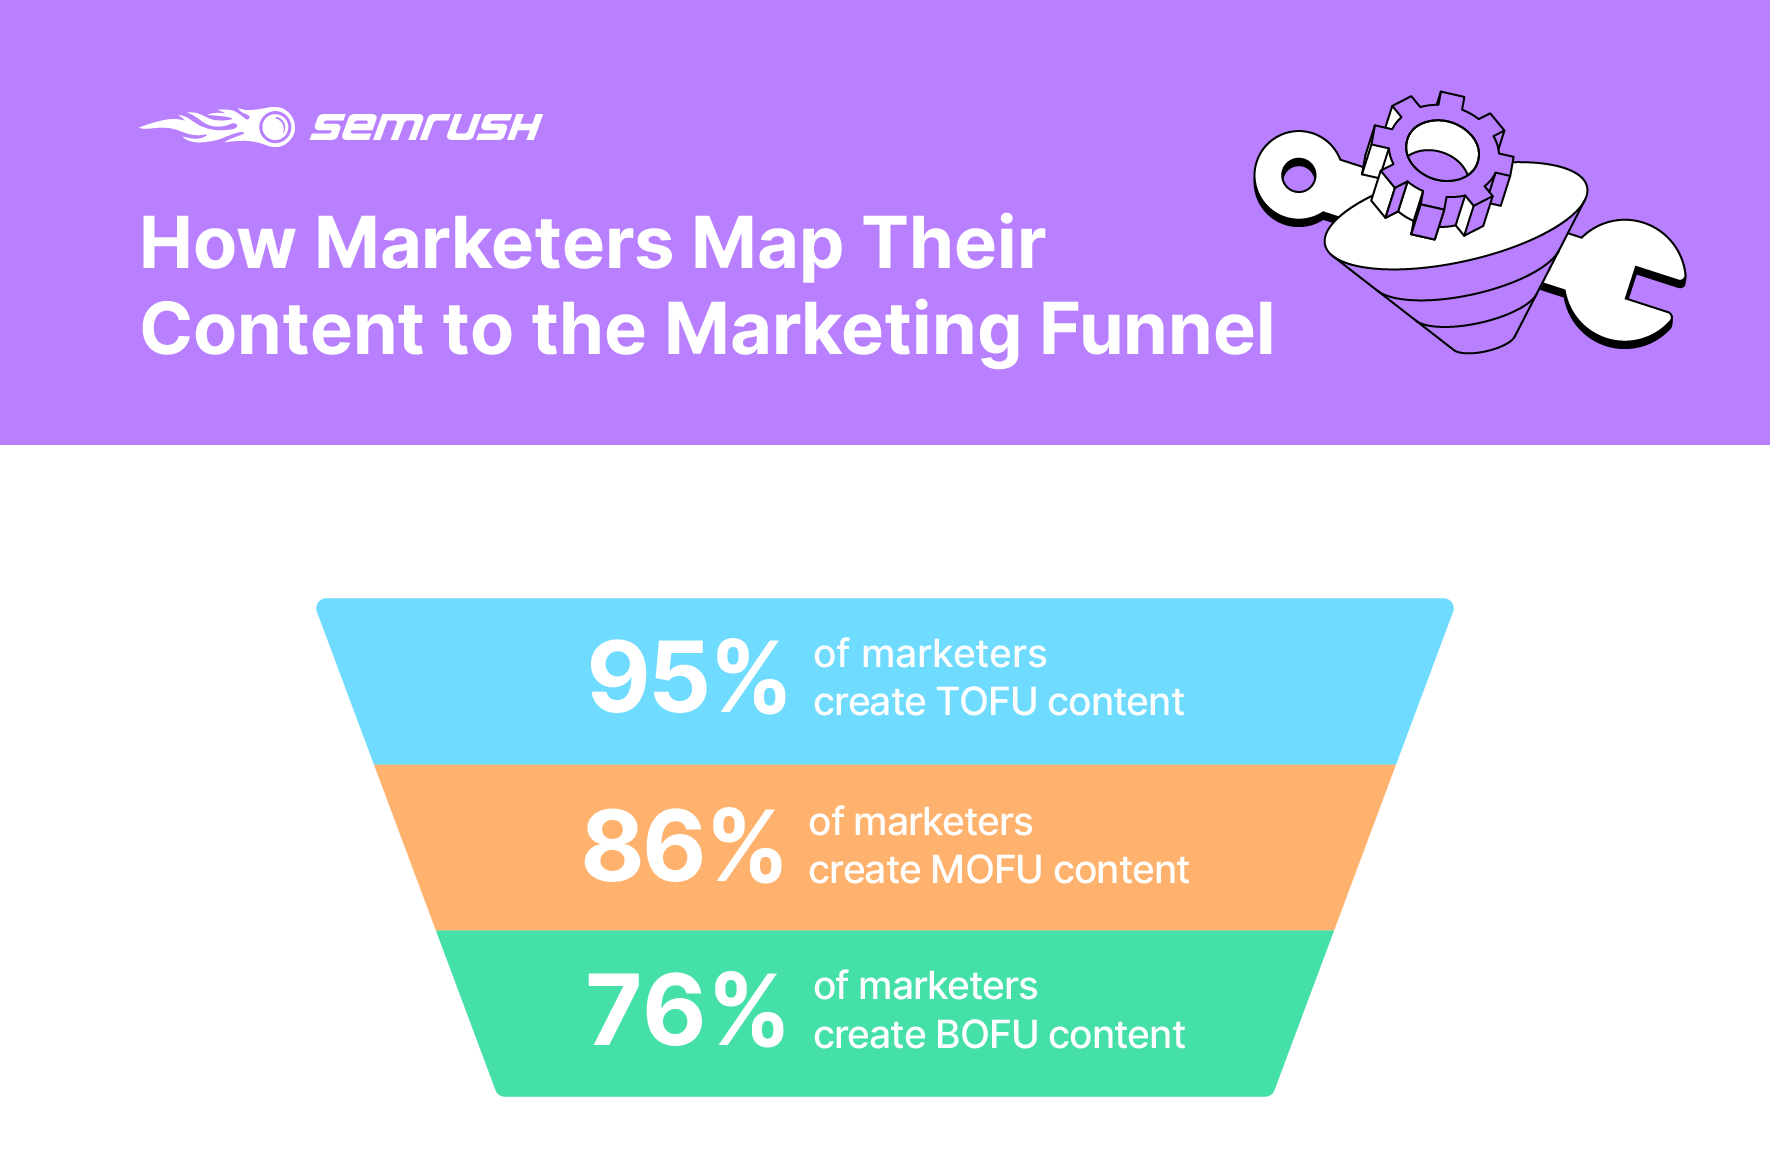 How marketers map their content to the funnel